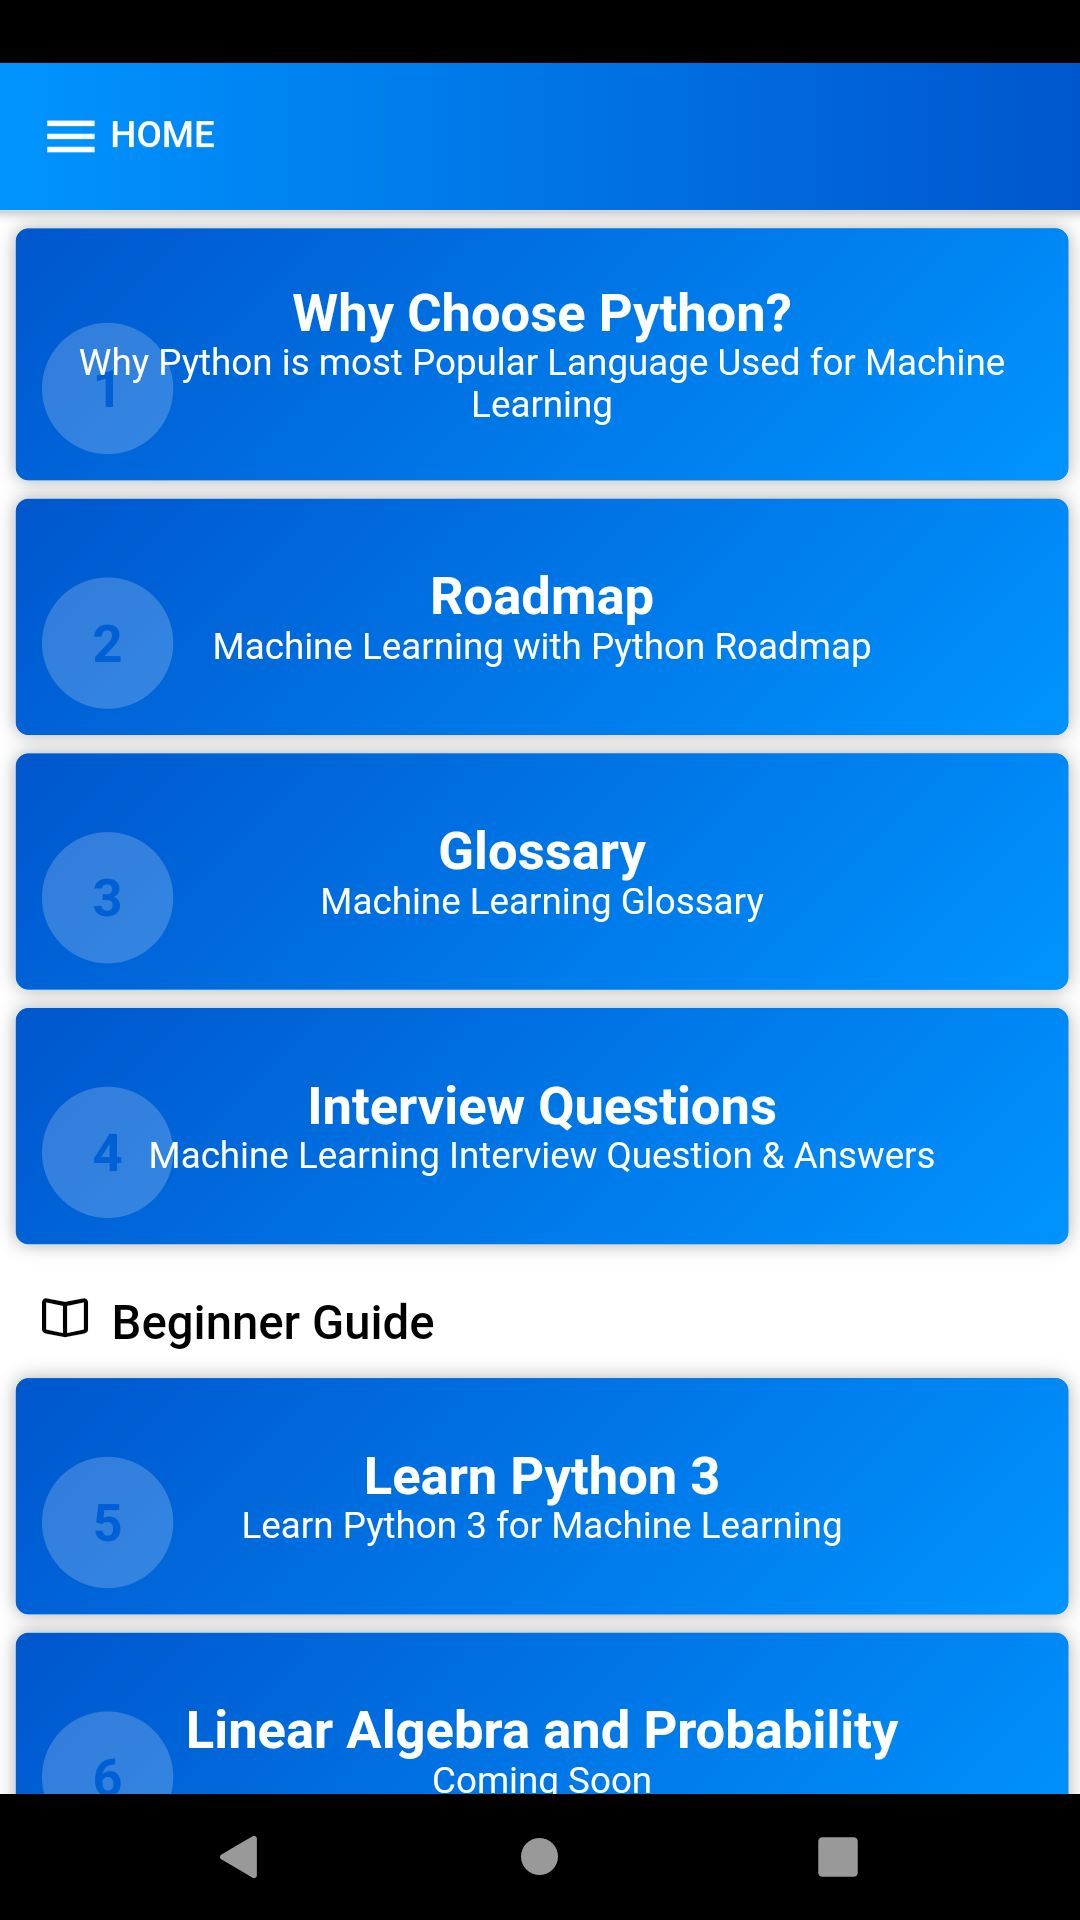 Machine Learning With Python, TensorFlow, Artificial Intelligence, Data Science, Deep Learning